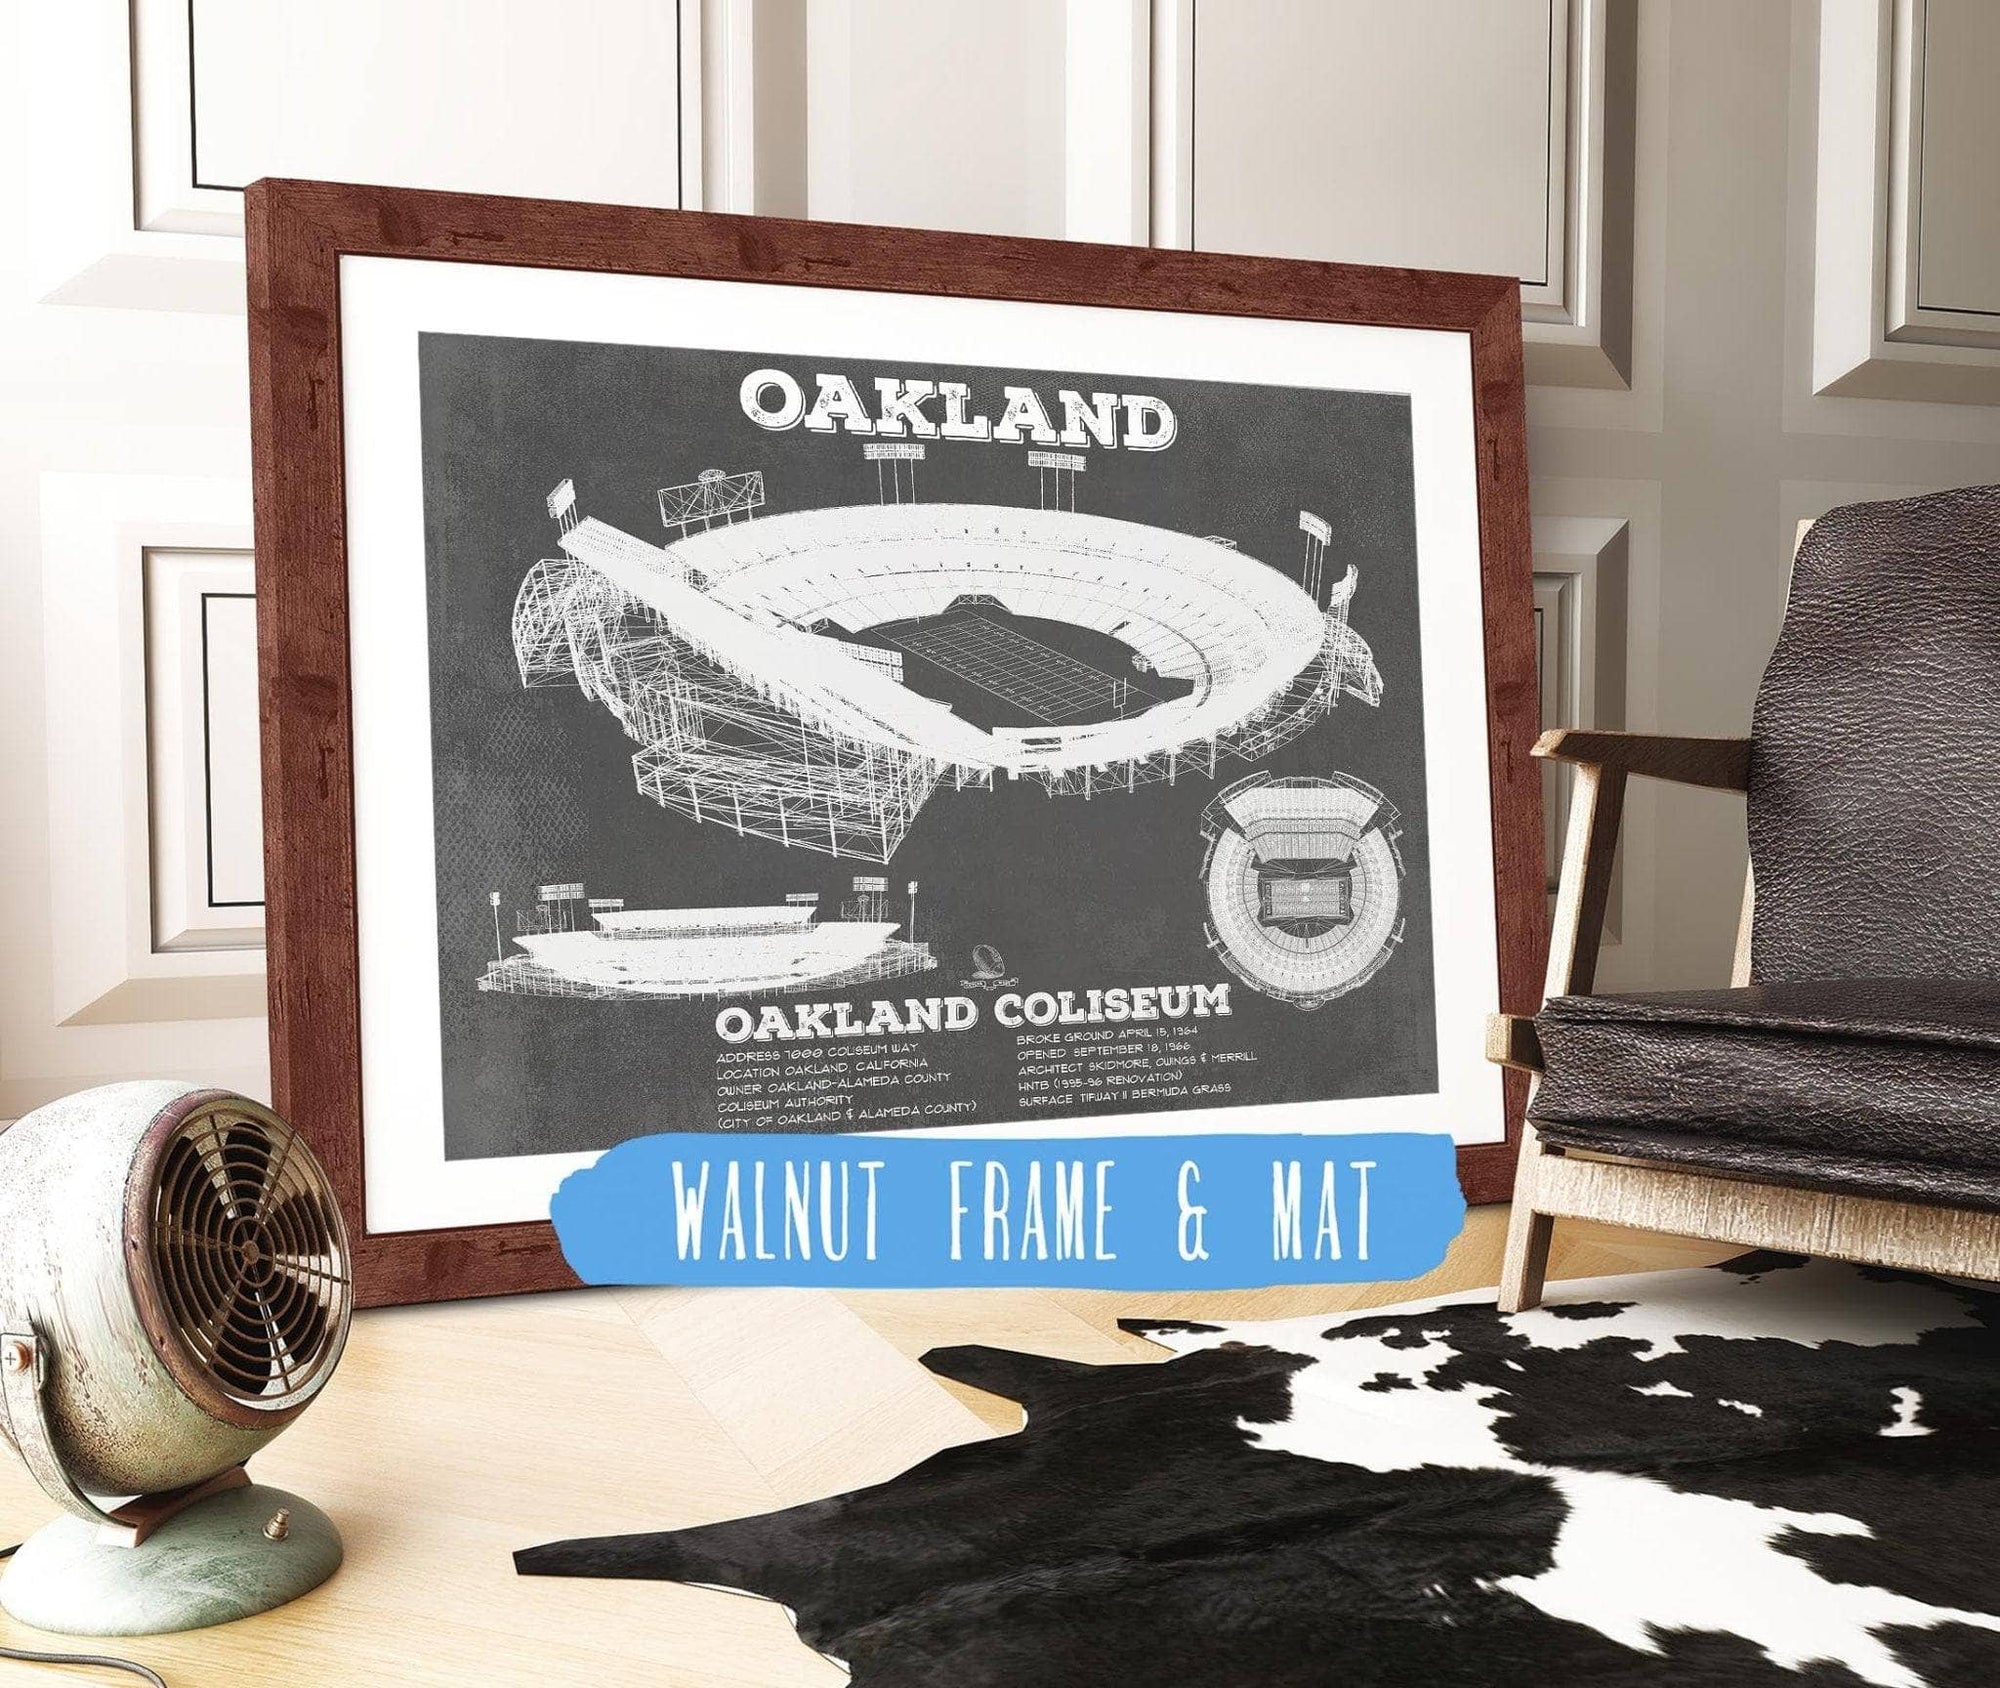 Cutler West Pro Football Collection 14" x 11" / Walnut Frame & Mat Oakland Raiders Team Color Alameda County Coliseum Seating Chart - Vintage Football Print 920787395-TOP_70497